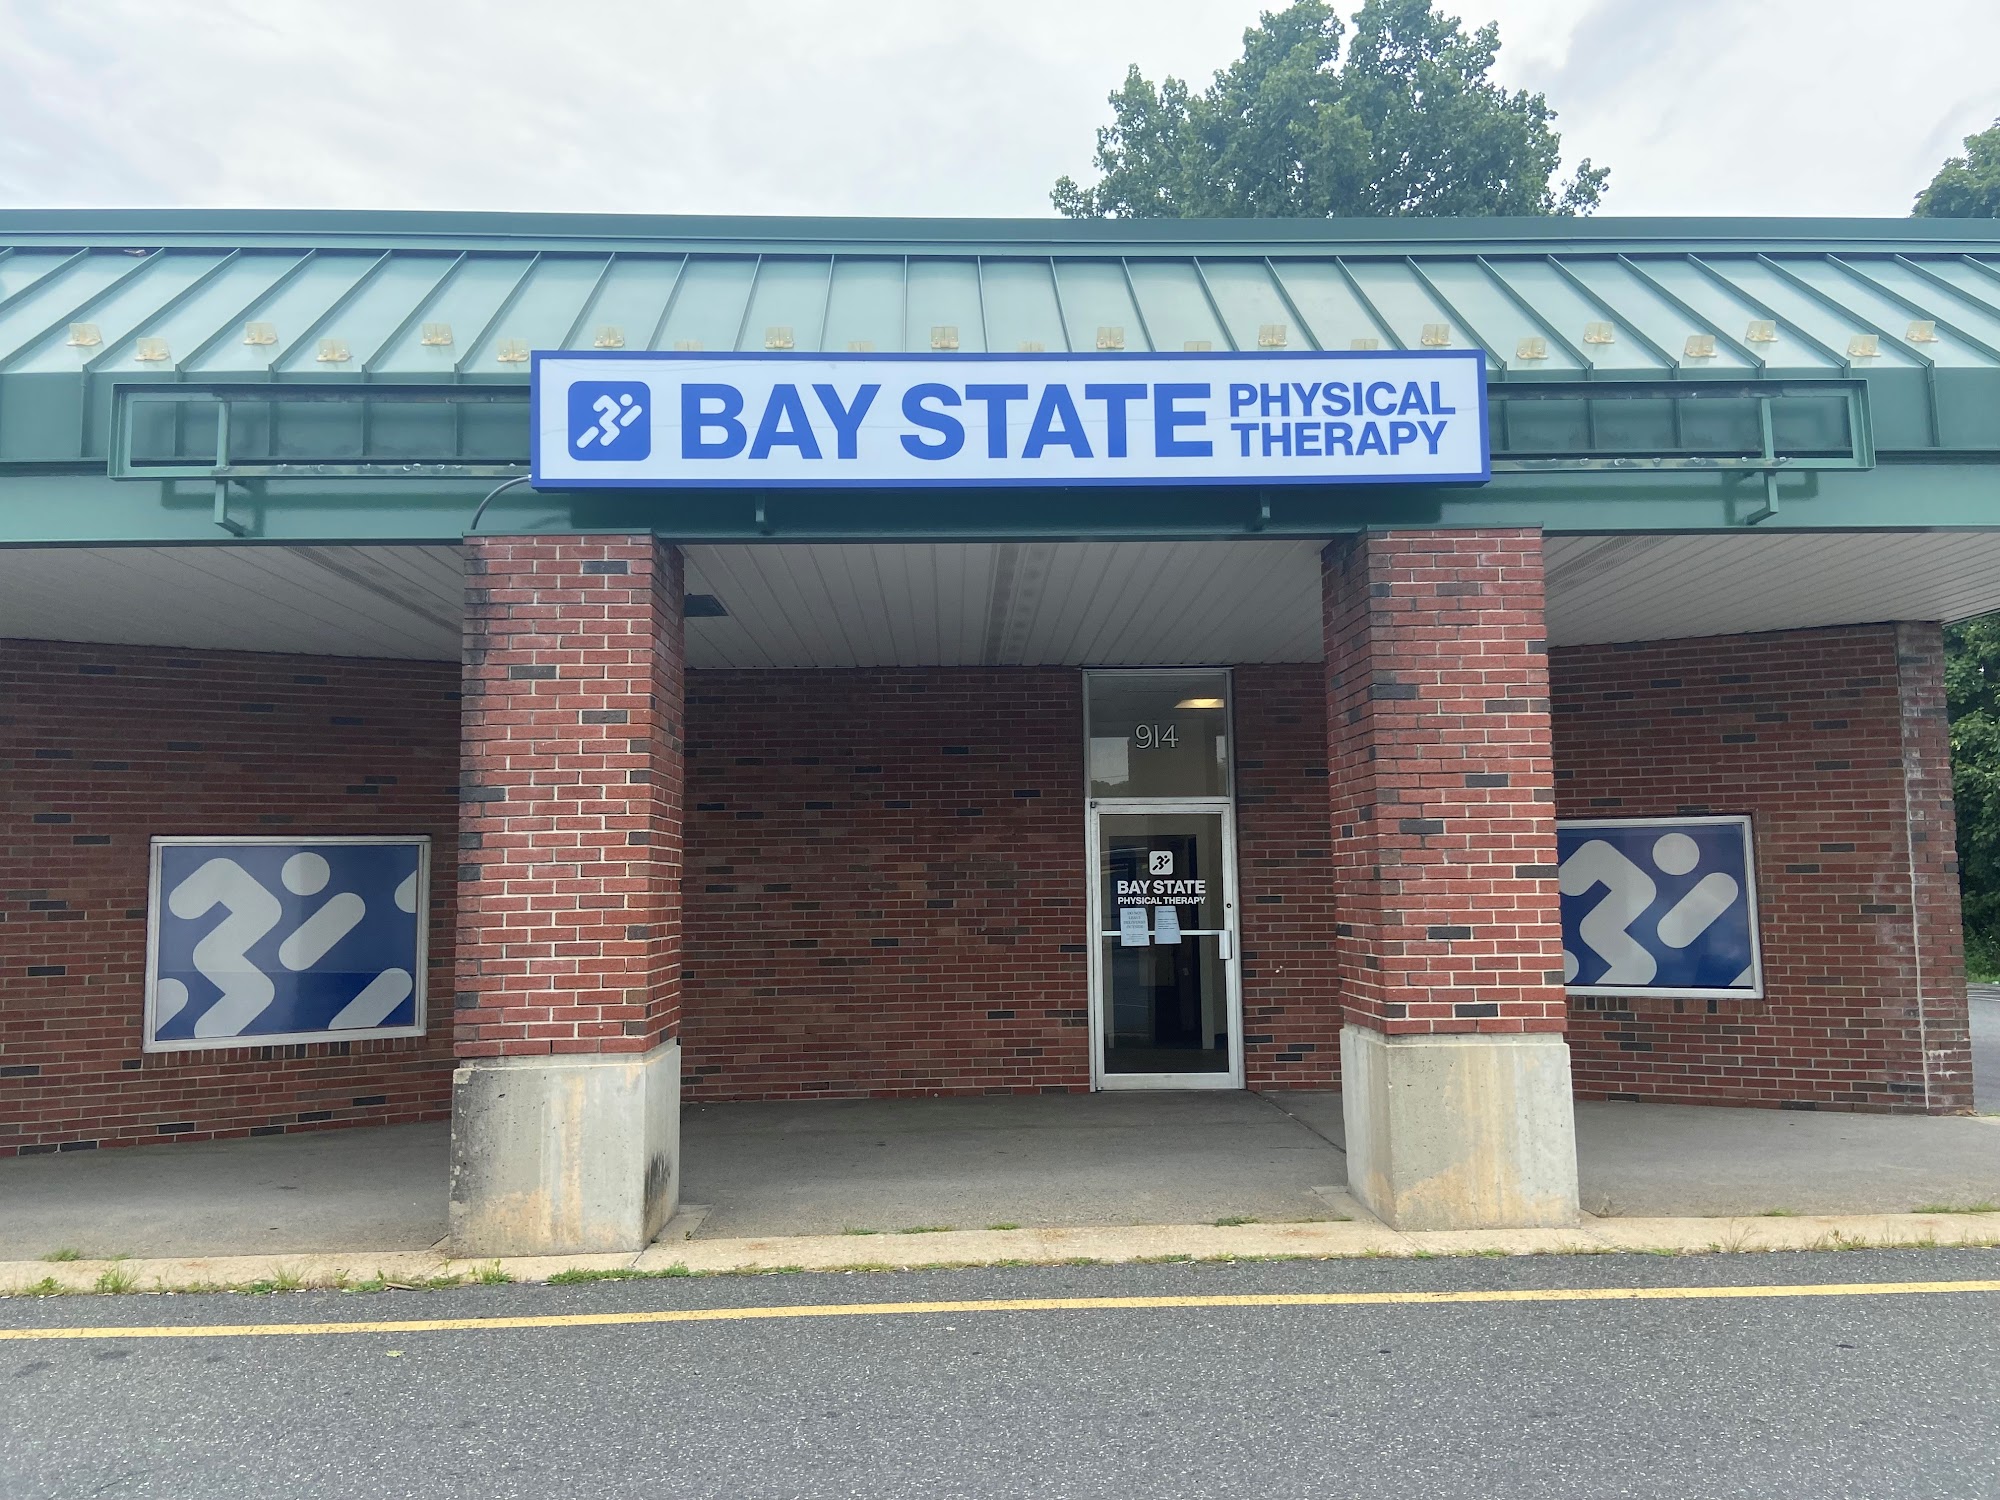 Bay State Physical Therapy 914 Main St, Southbridge Massachusetts 01550